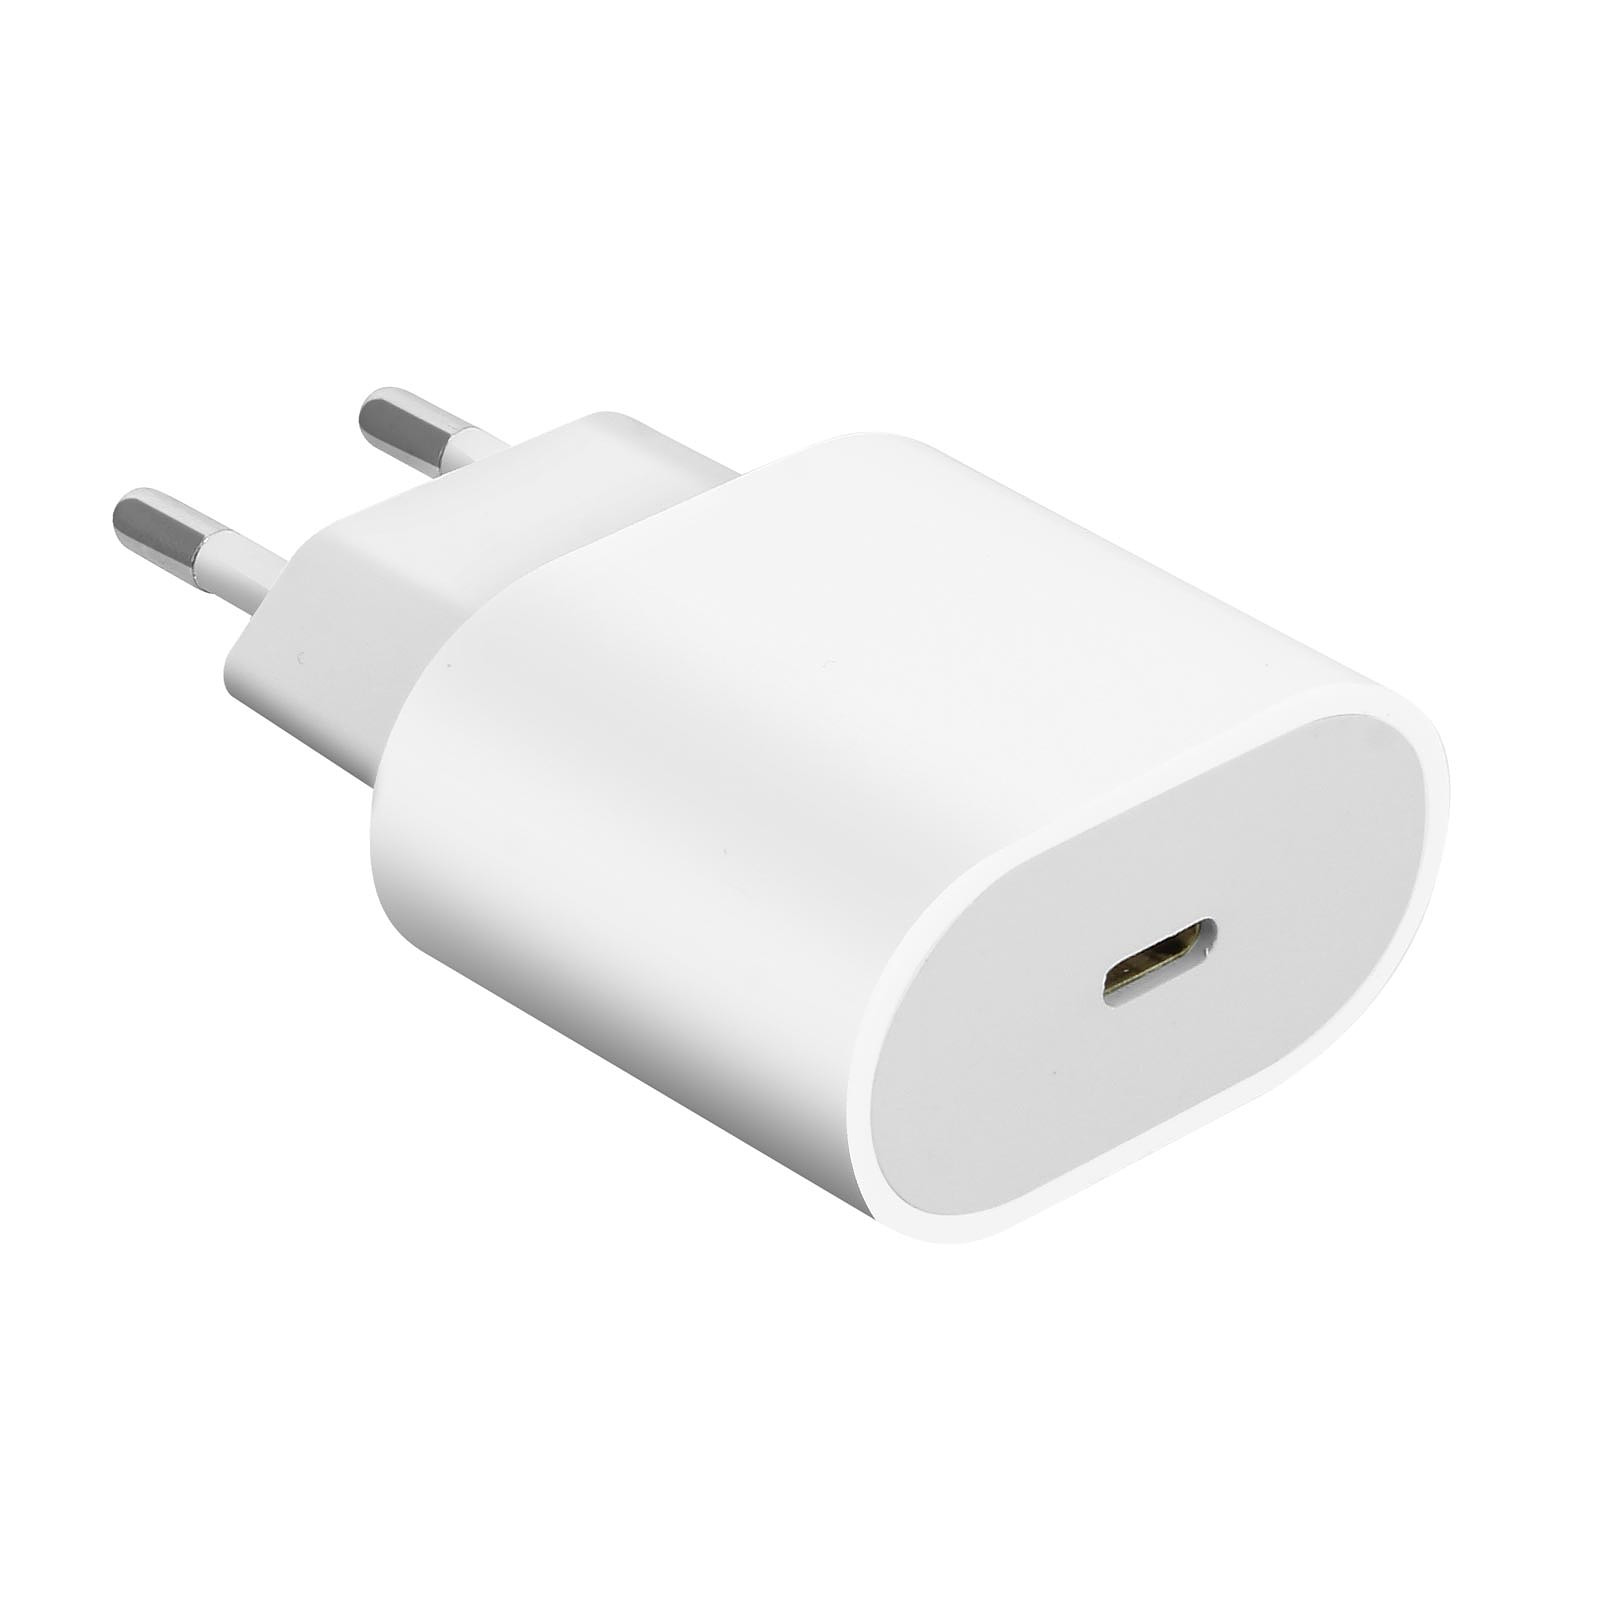 Avizar Chargeur Secteur USB Type C Power Delivery 20W Recharge Rapide Blanc - Chargeur telephone Avizar